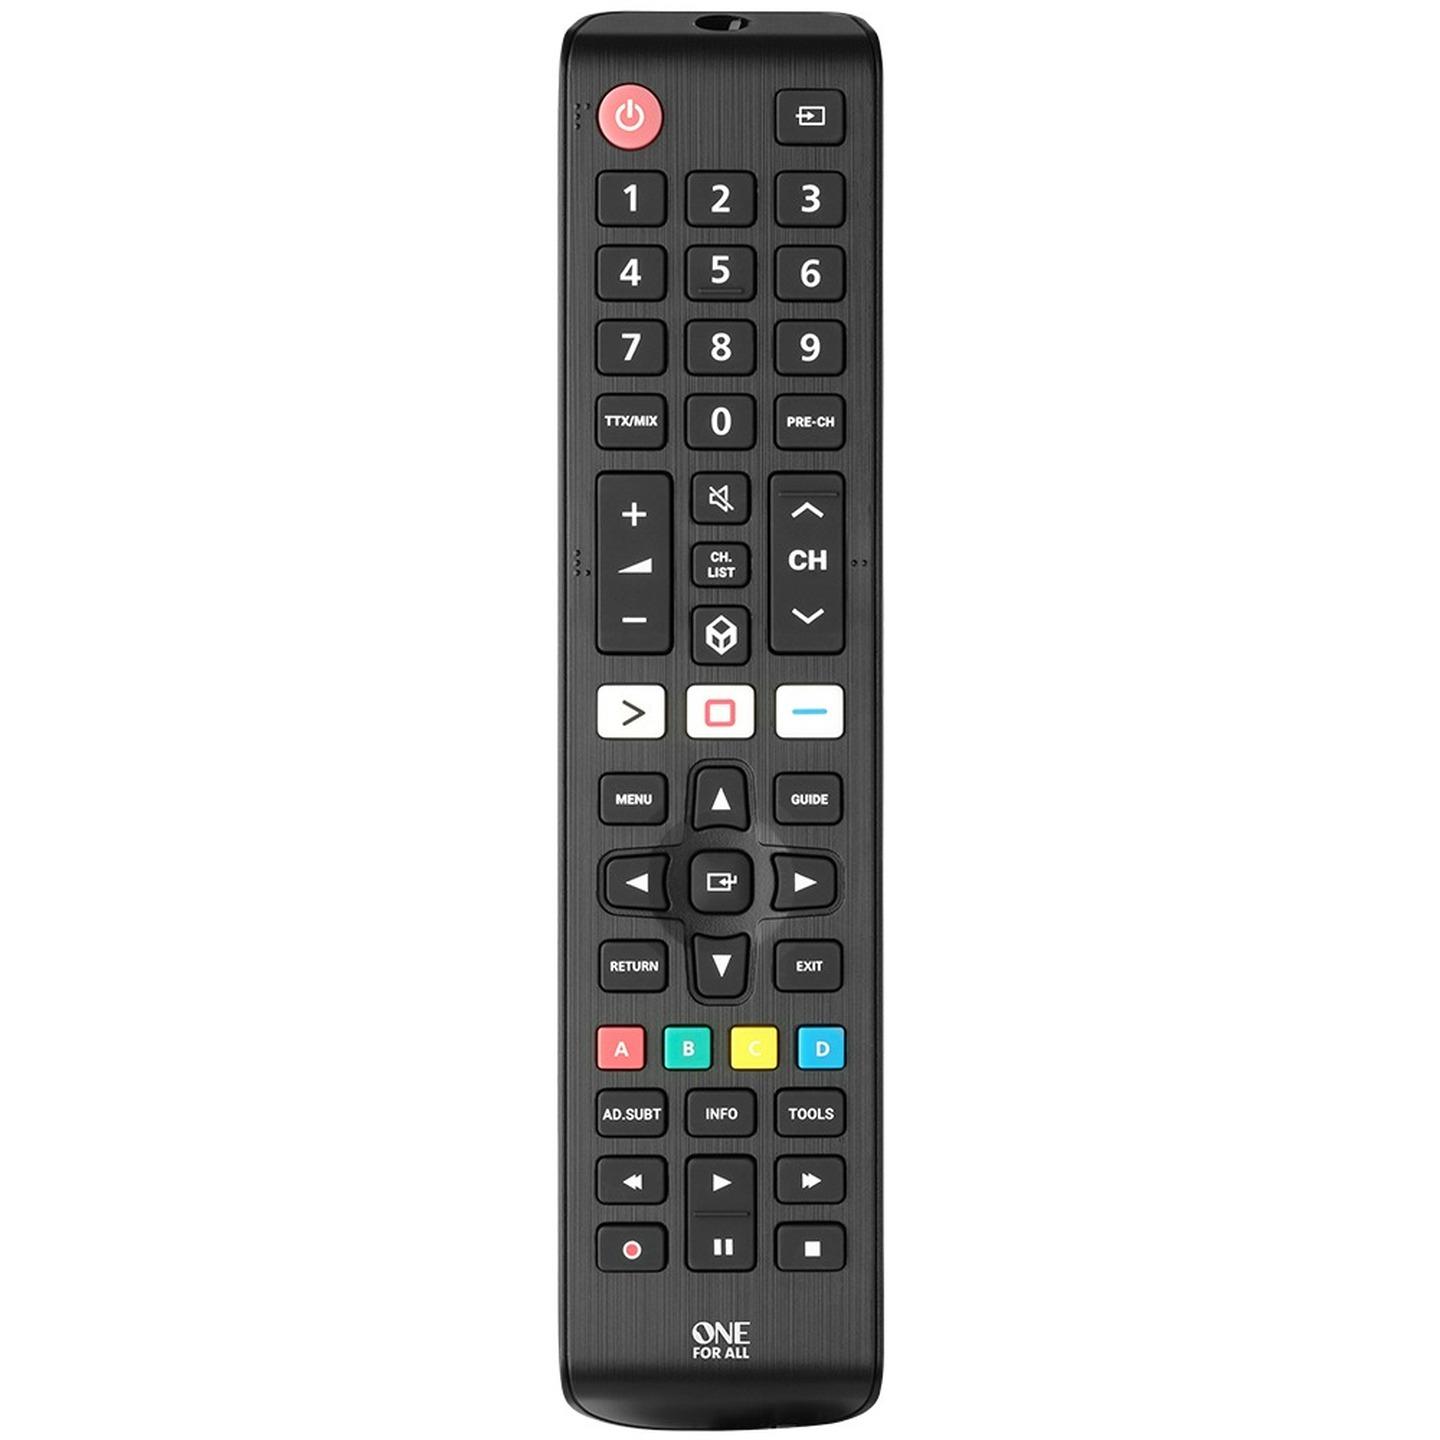 One For All Remote to Suit Samsung TV with NET-TV